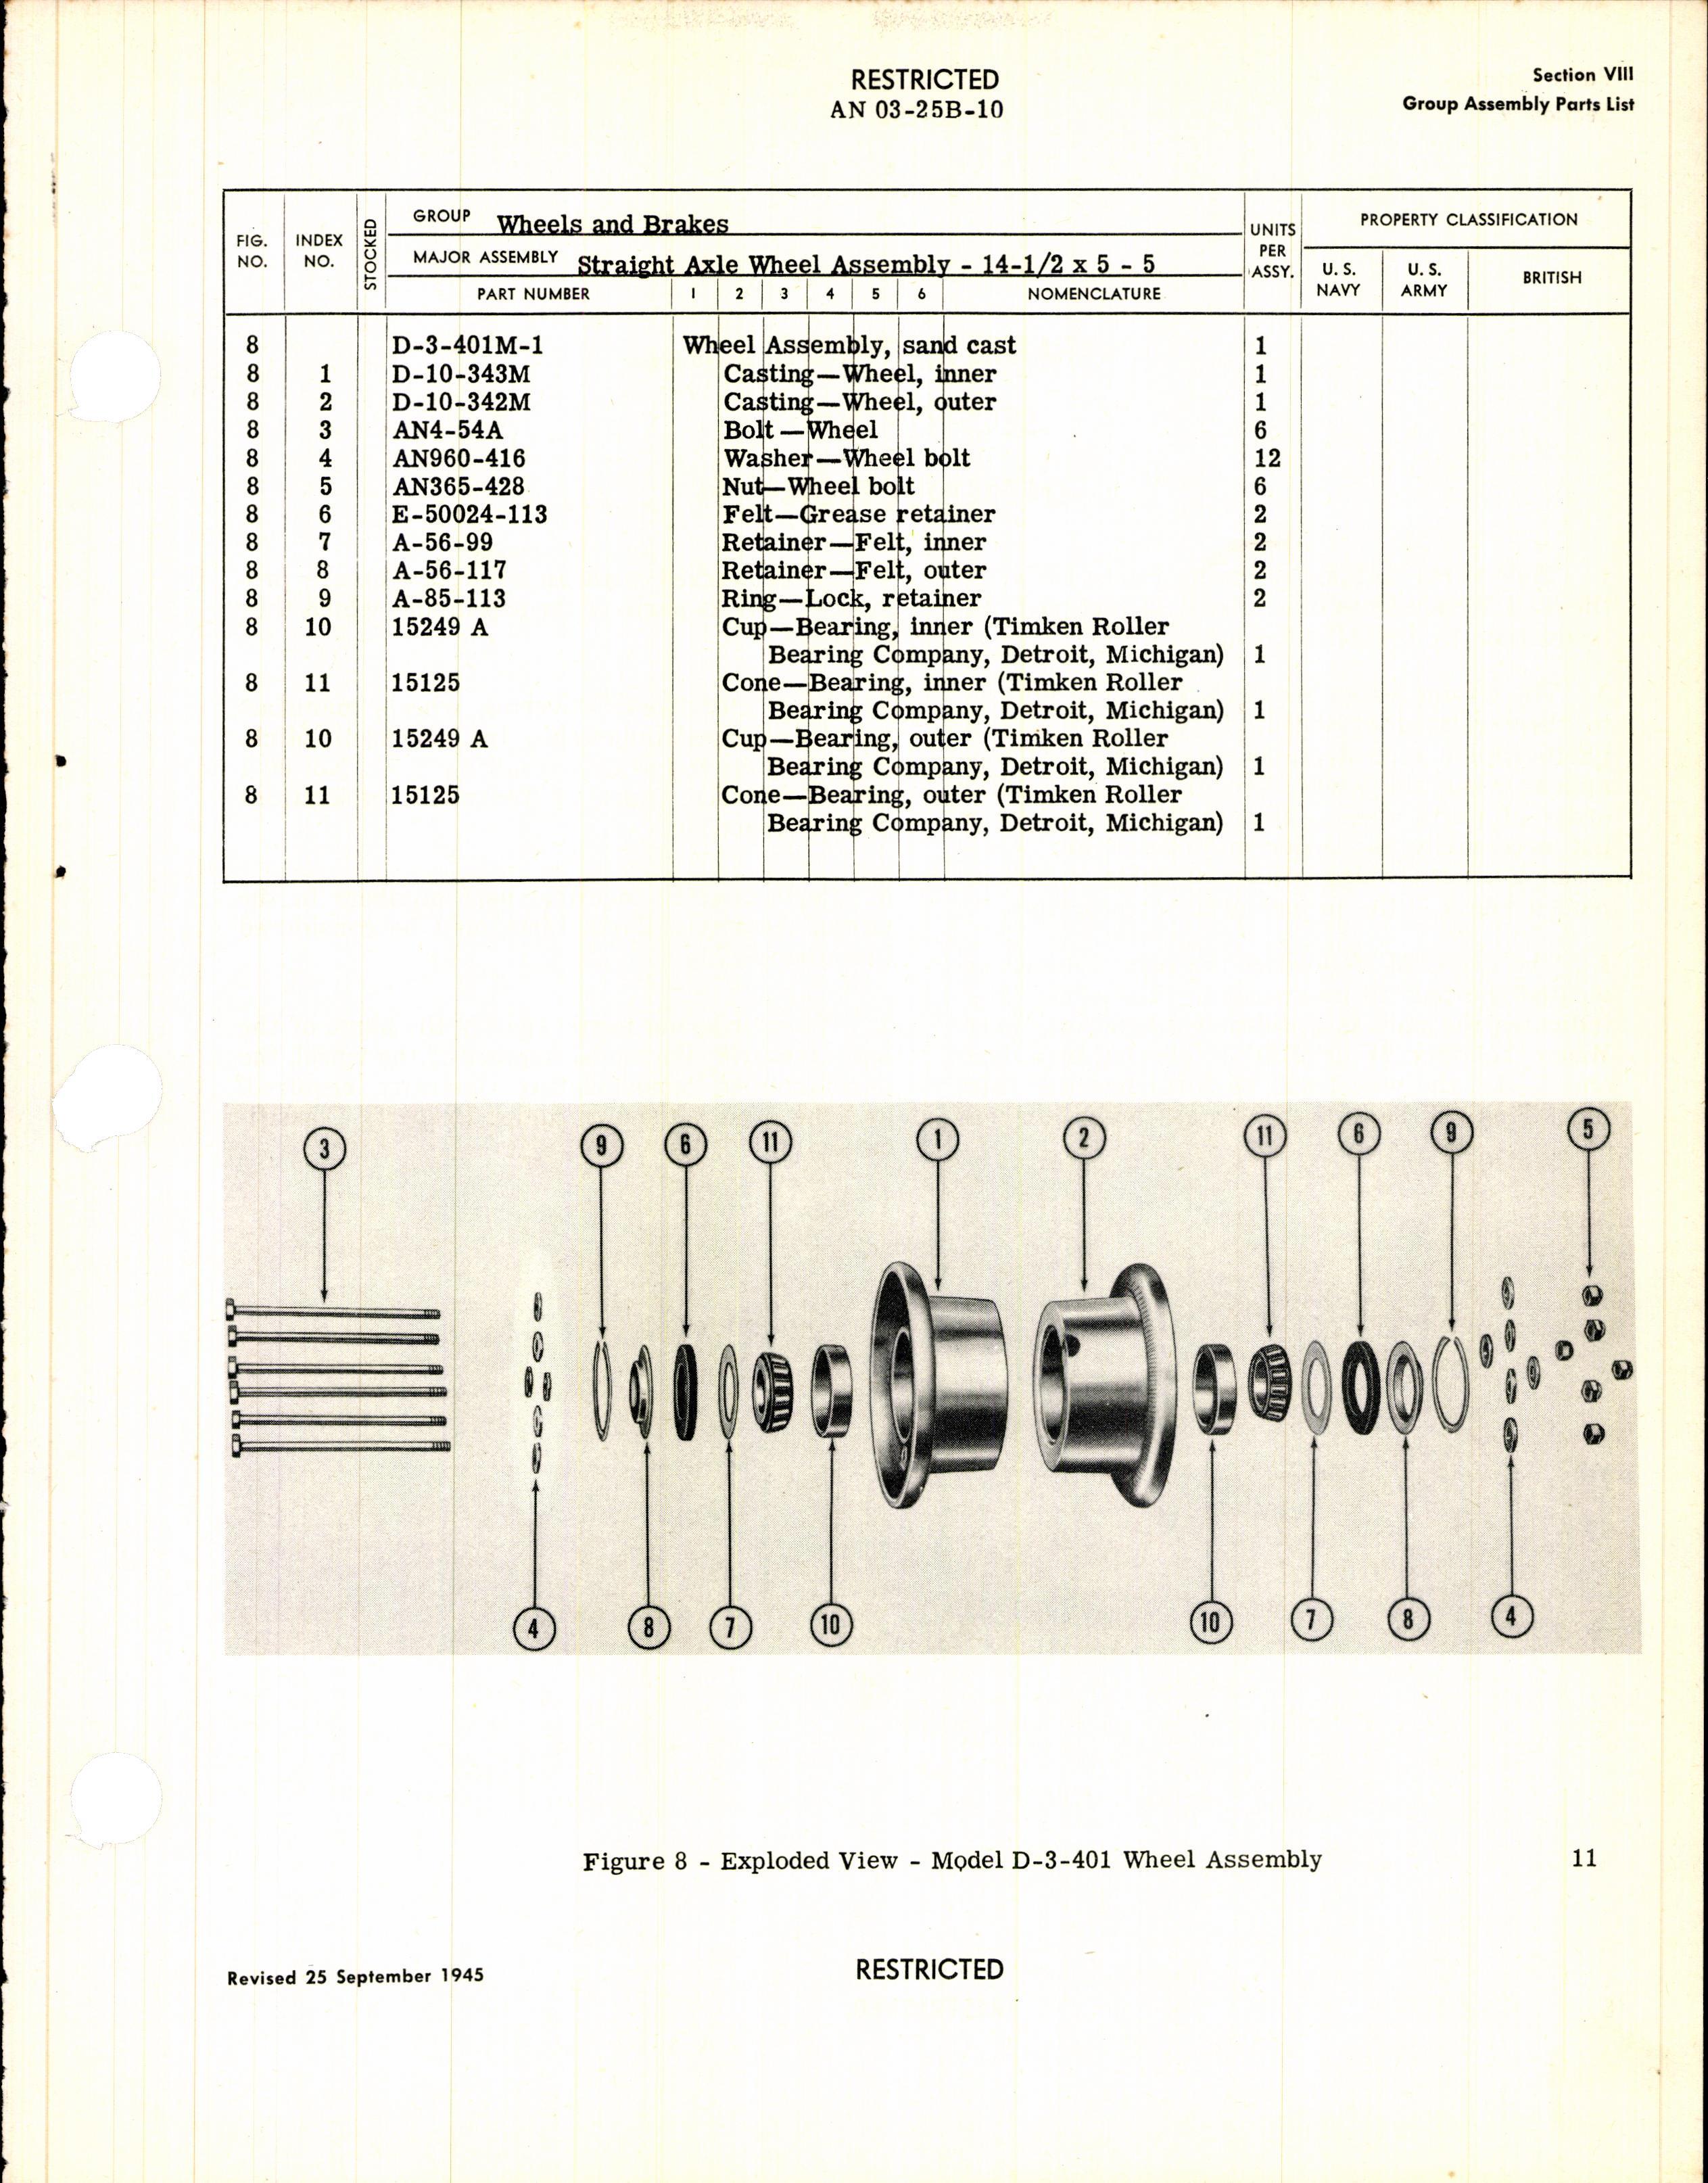 Sample page 13 from AirCorps Library document: Operation, Service & Overhaul Instructions with Parts Catalog for High-Pressure Tail Wheels